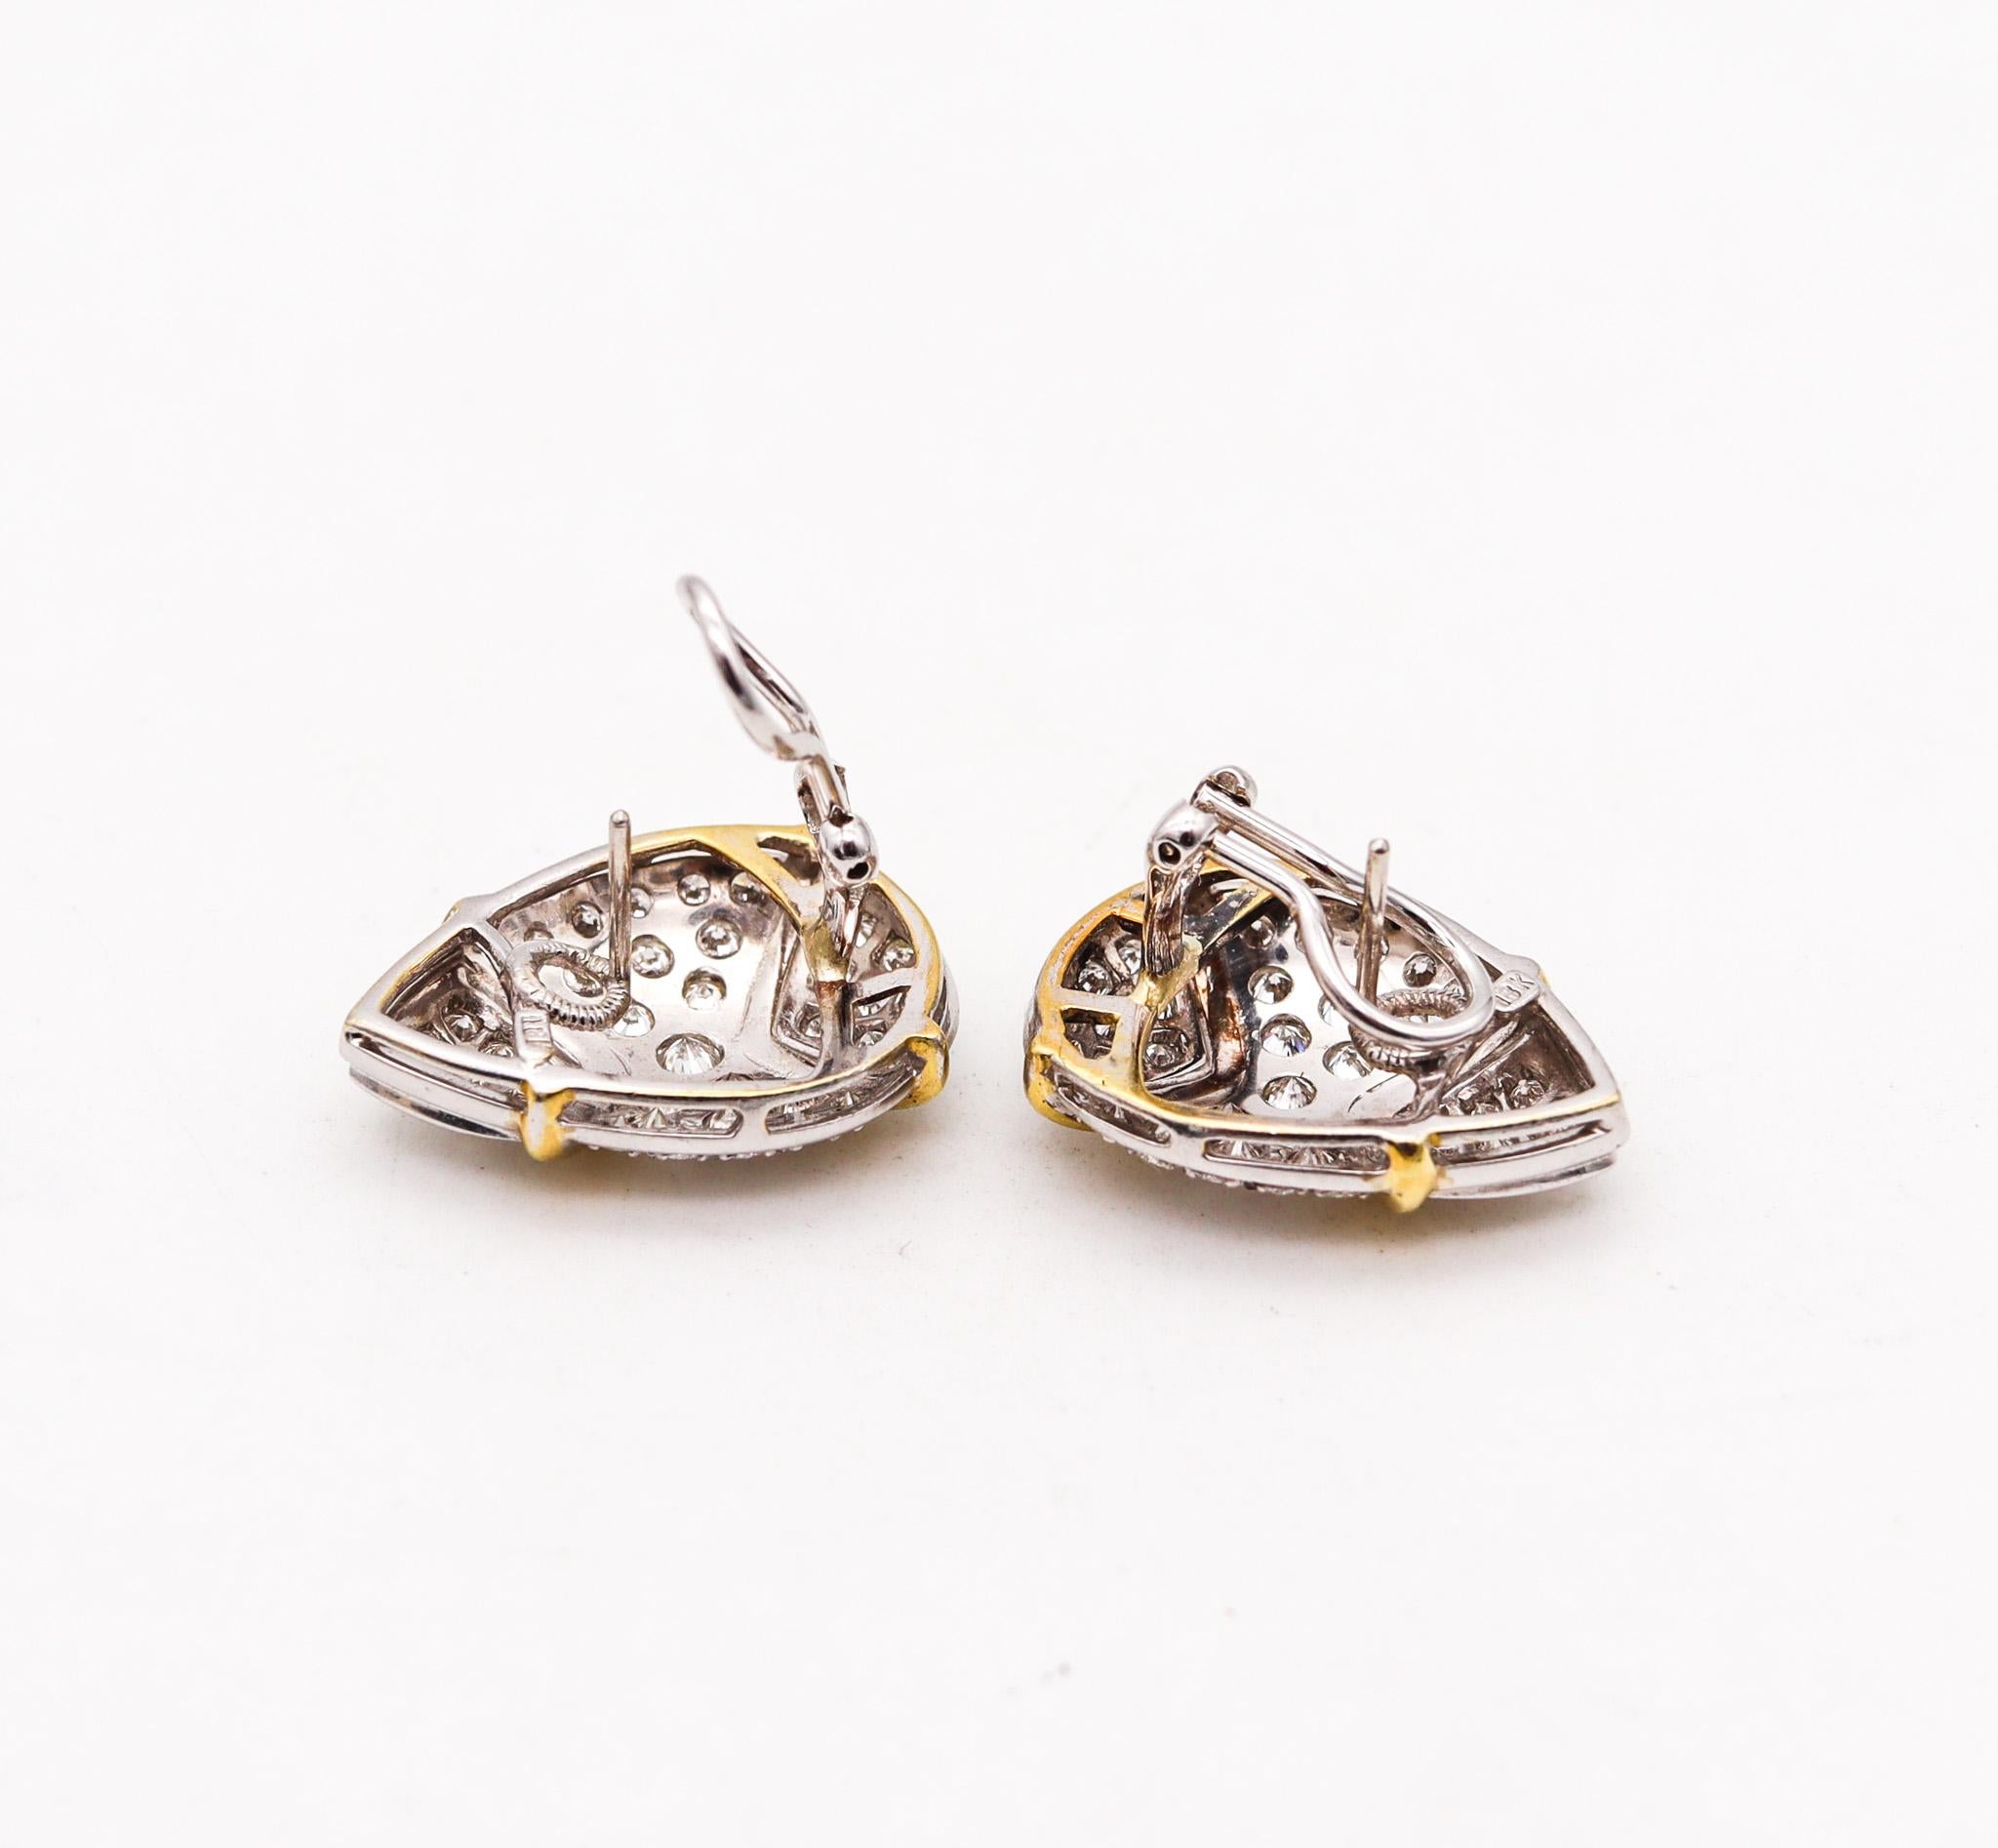 Brilliant Cut Hammerman Brothers Modernist Cluster Earrings 18Kt Gold With 6.18 Ctw In Diamond